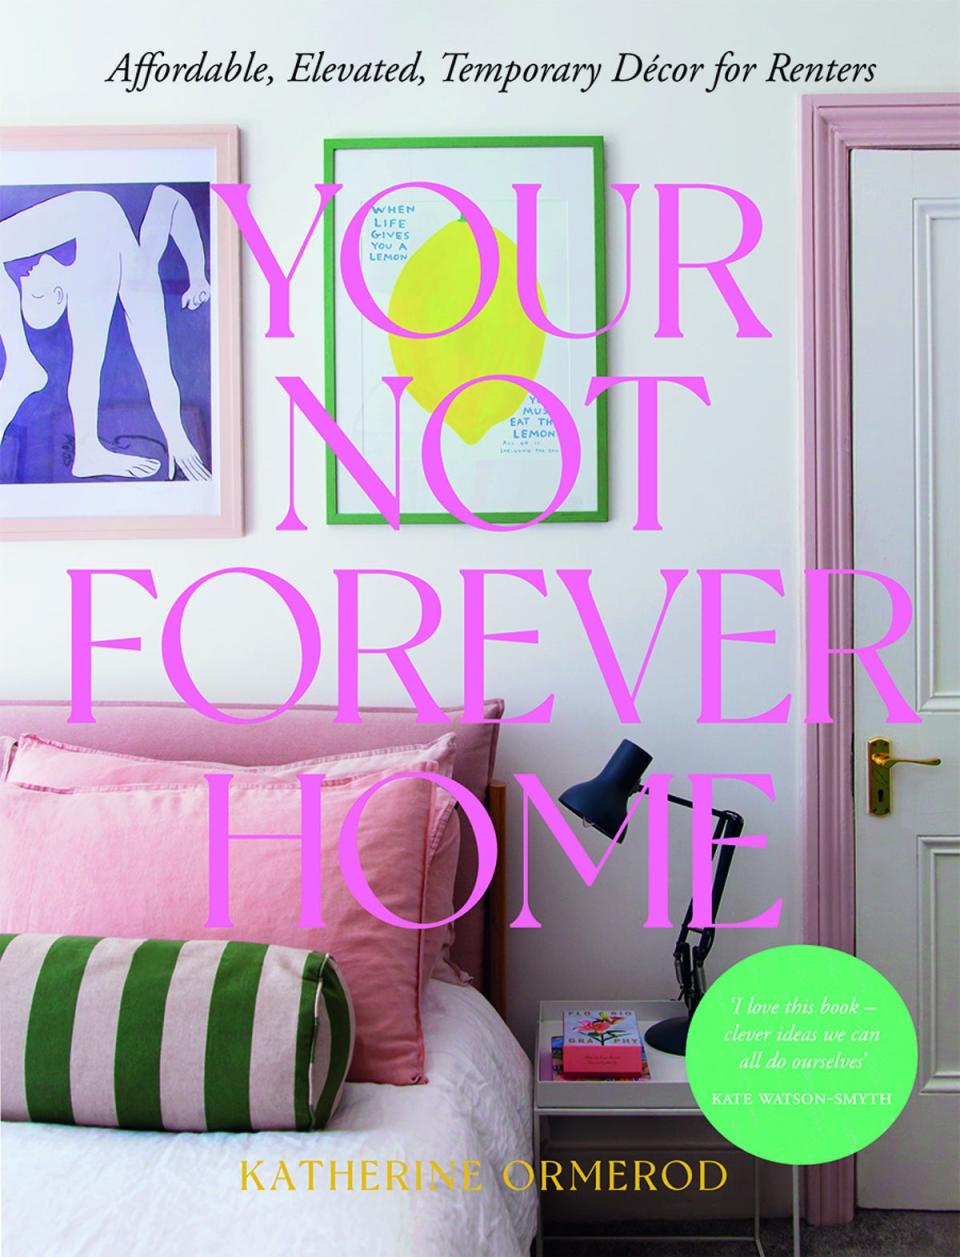 Your Not Forever Home is the temporary interior decor design guide renters need (Yuki Sugiura/Quadrille)